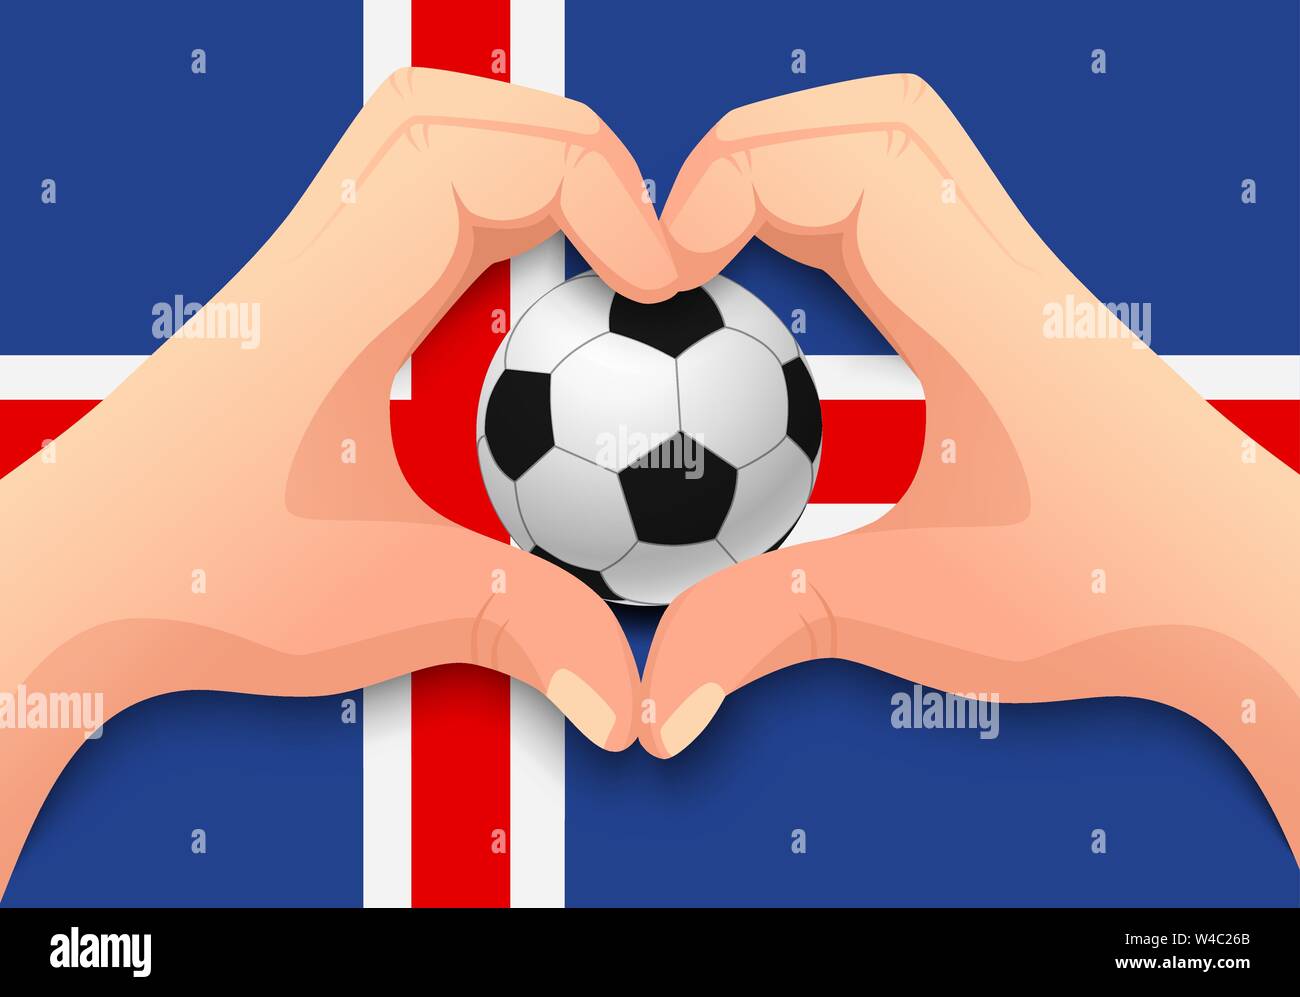 Iceland flag and hand heart shape. National football background. Soccer ball with flag of Iceland vector illustration Stock Vector